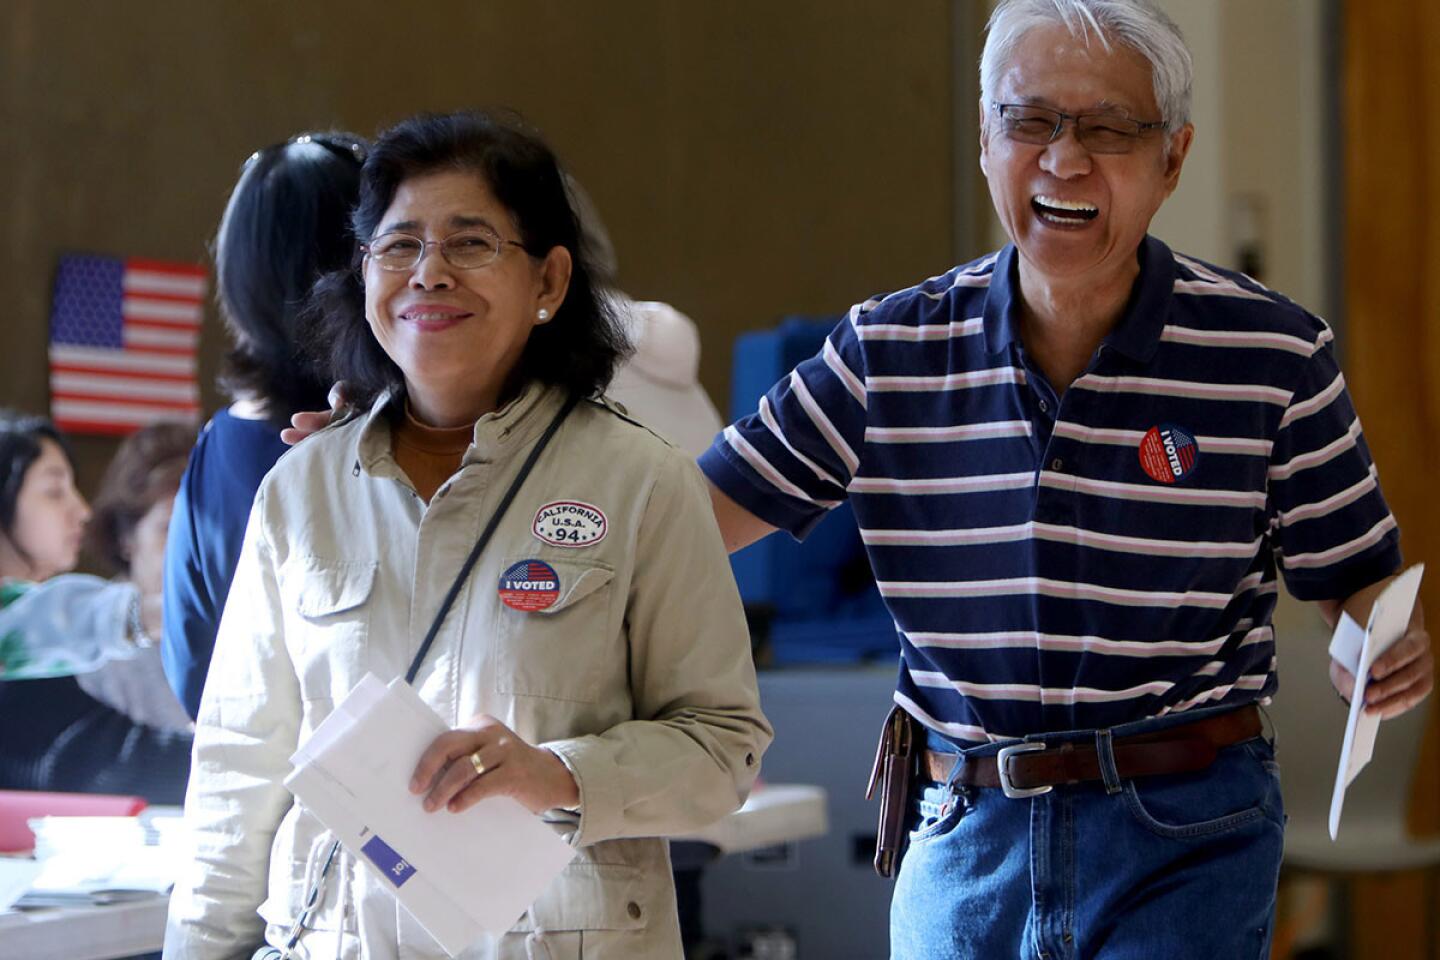 Photo Gallery: Crowds come out to vote in Glendale